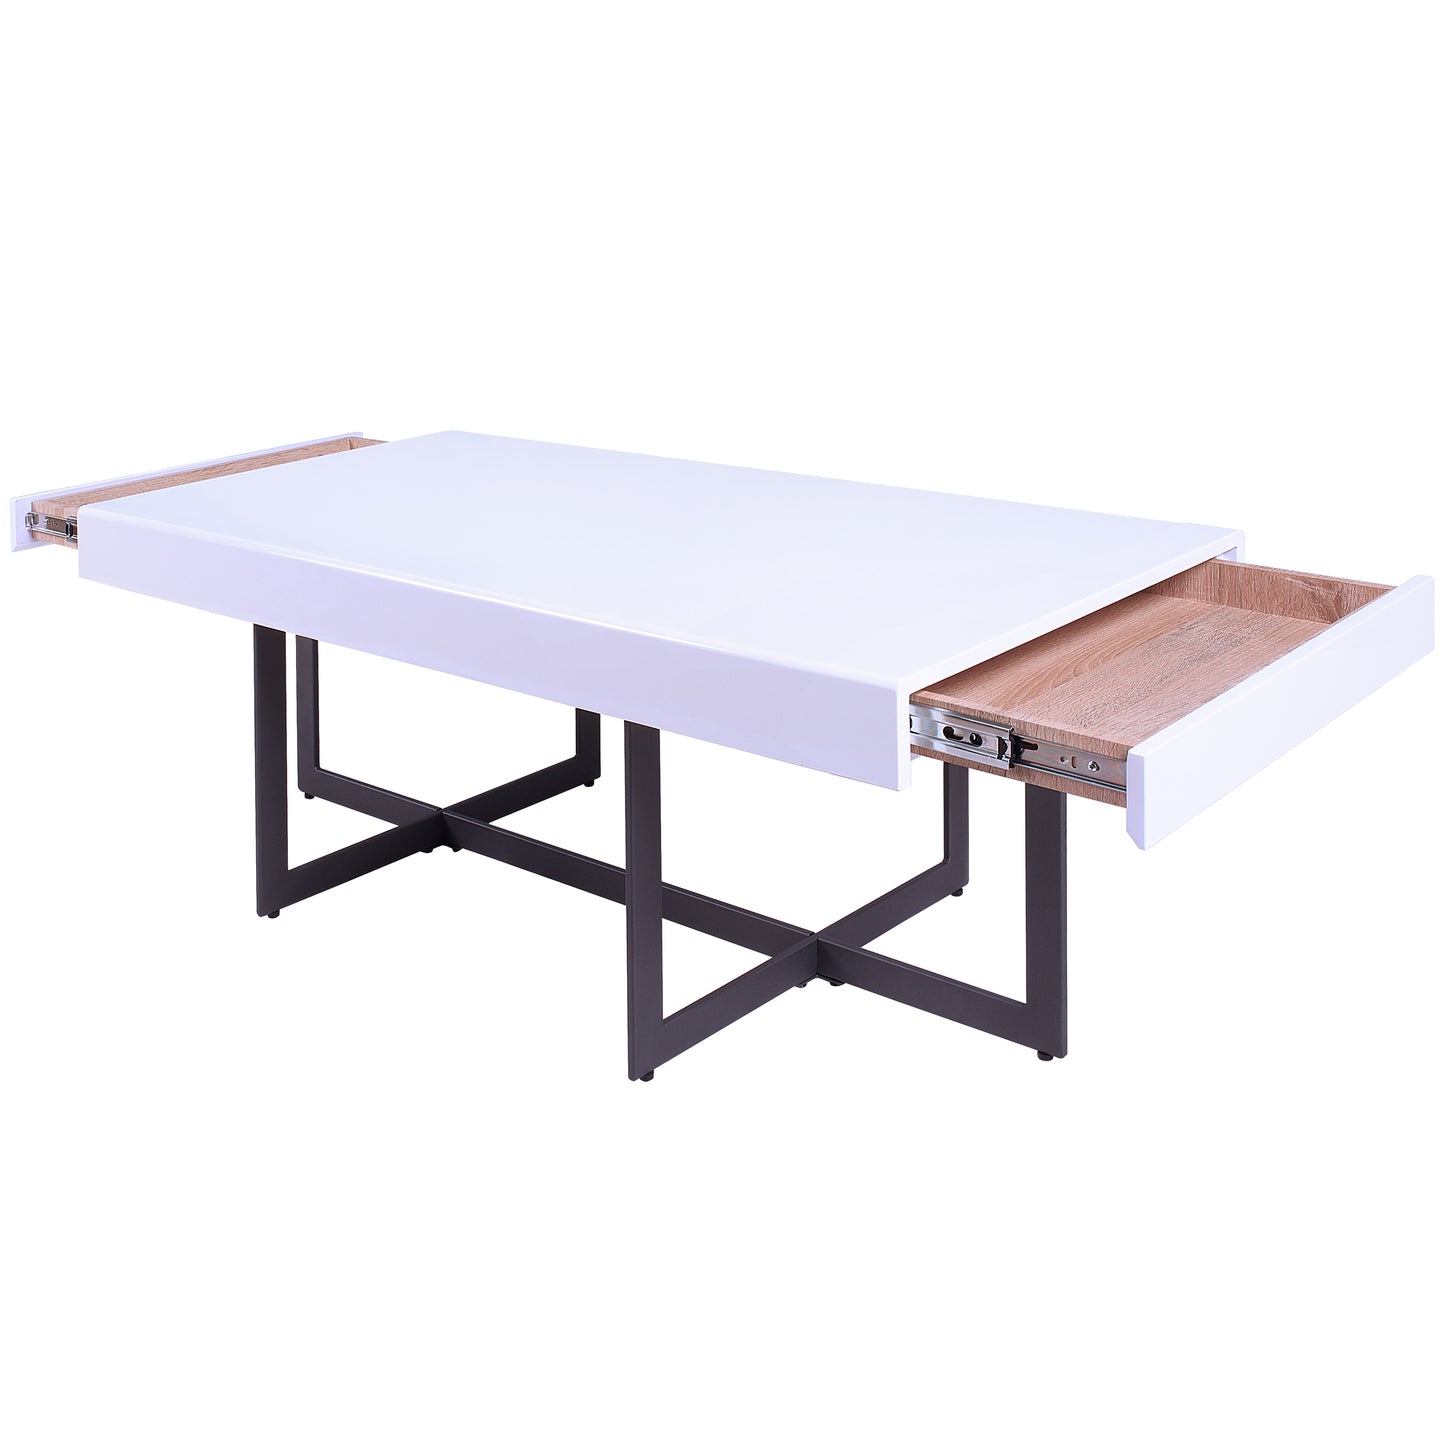 Left angled coffee table only from a two-piece modern white high gloss and gunmetal storage coffee table set with hidden drawers open on a white background